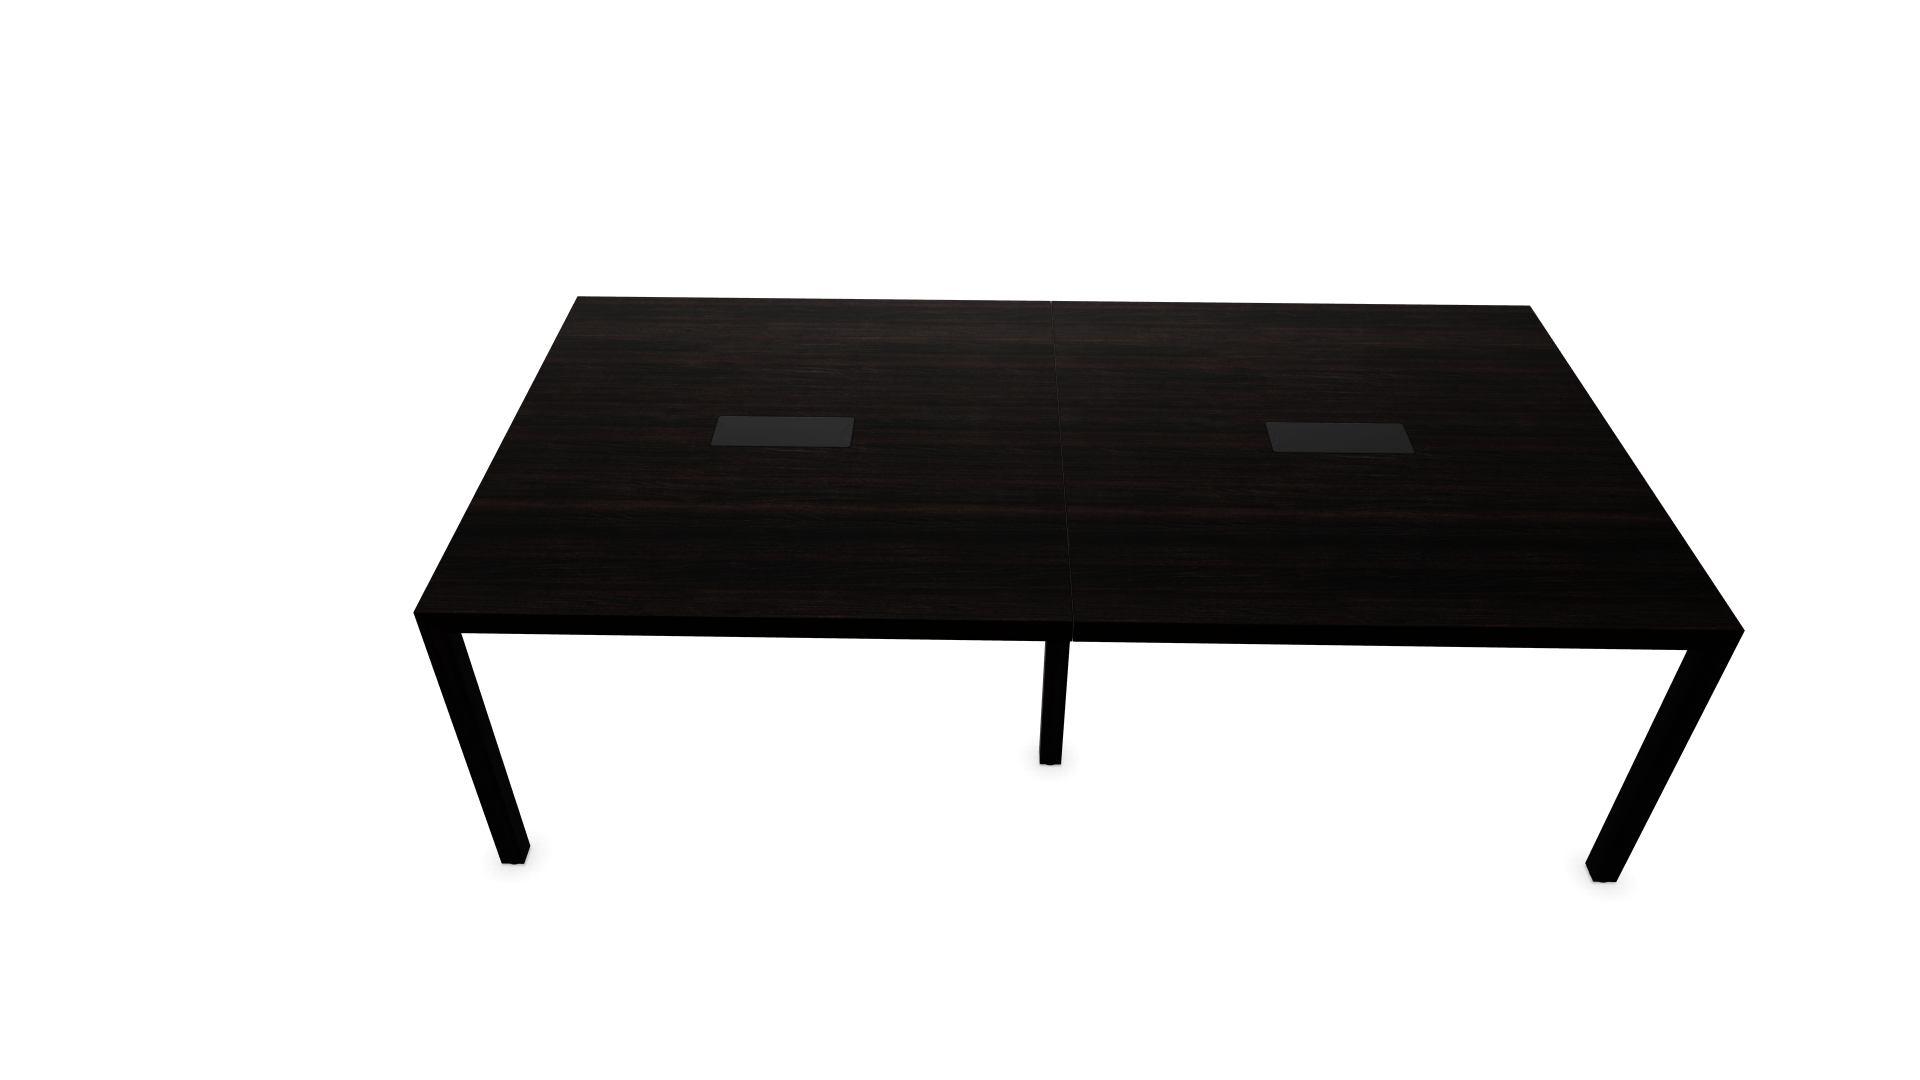 Actiu Prisma Side by Side Meeting Table